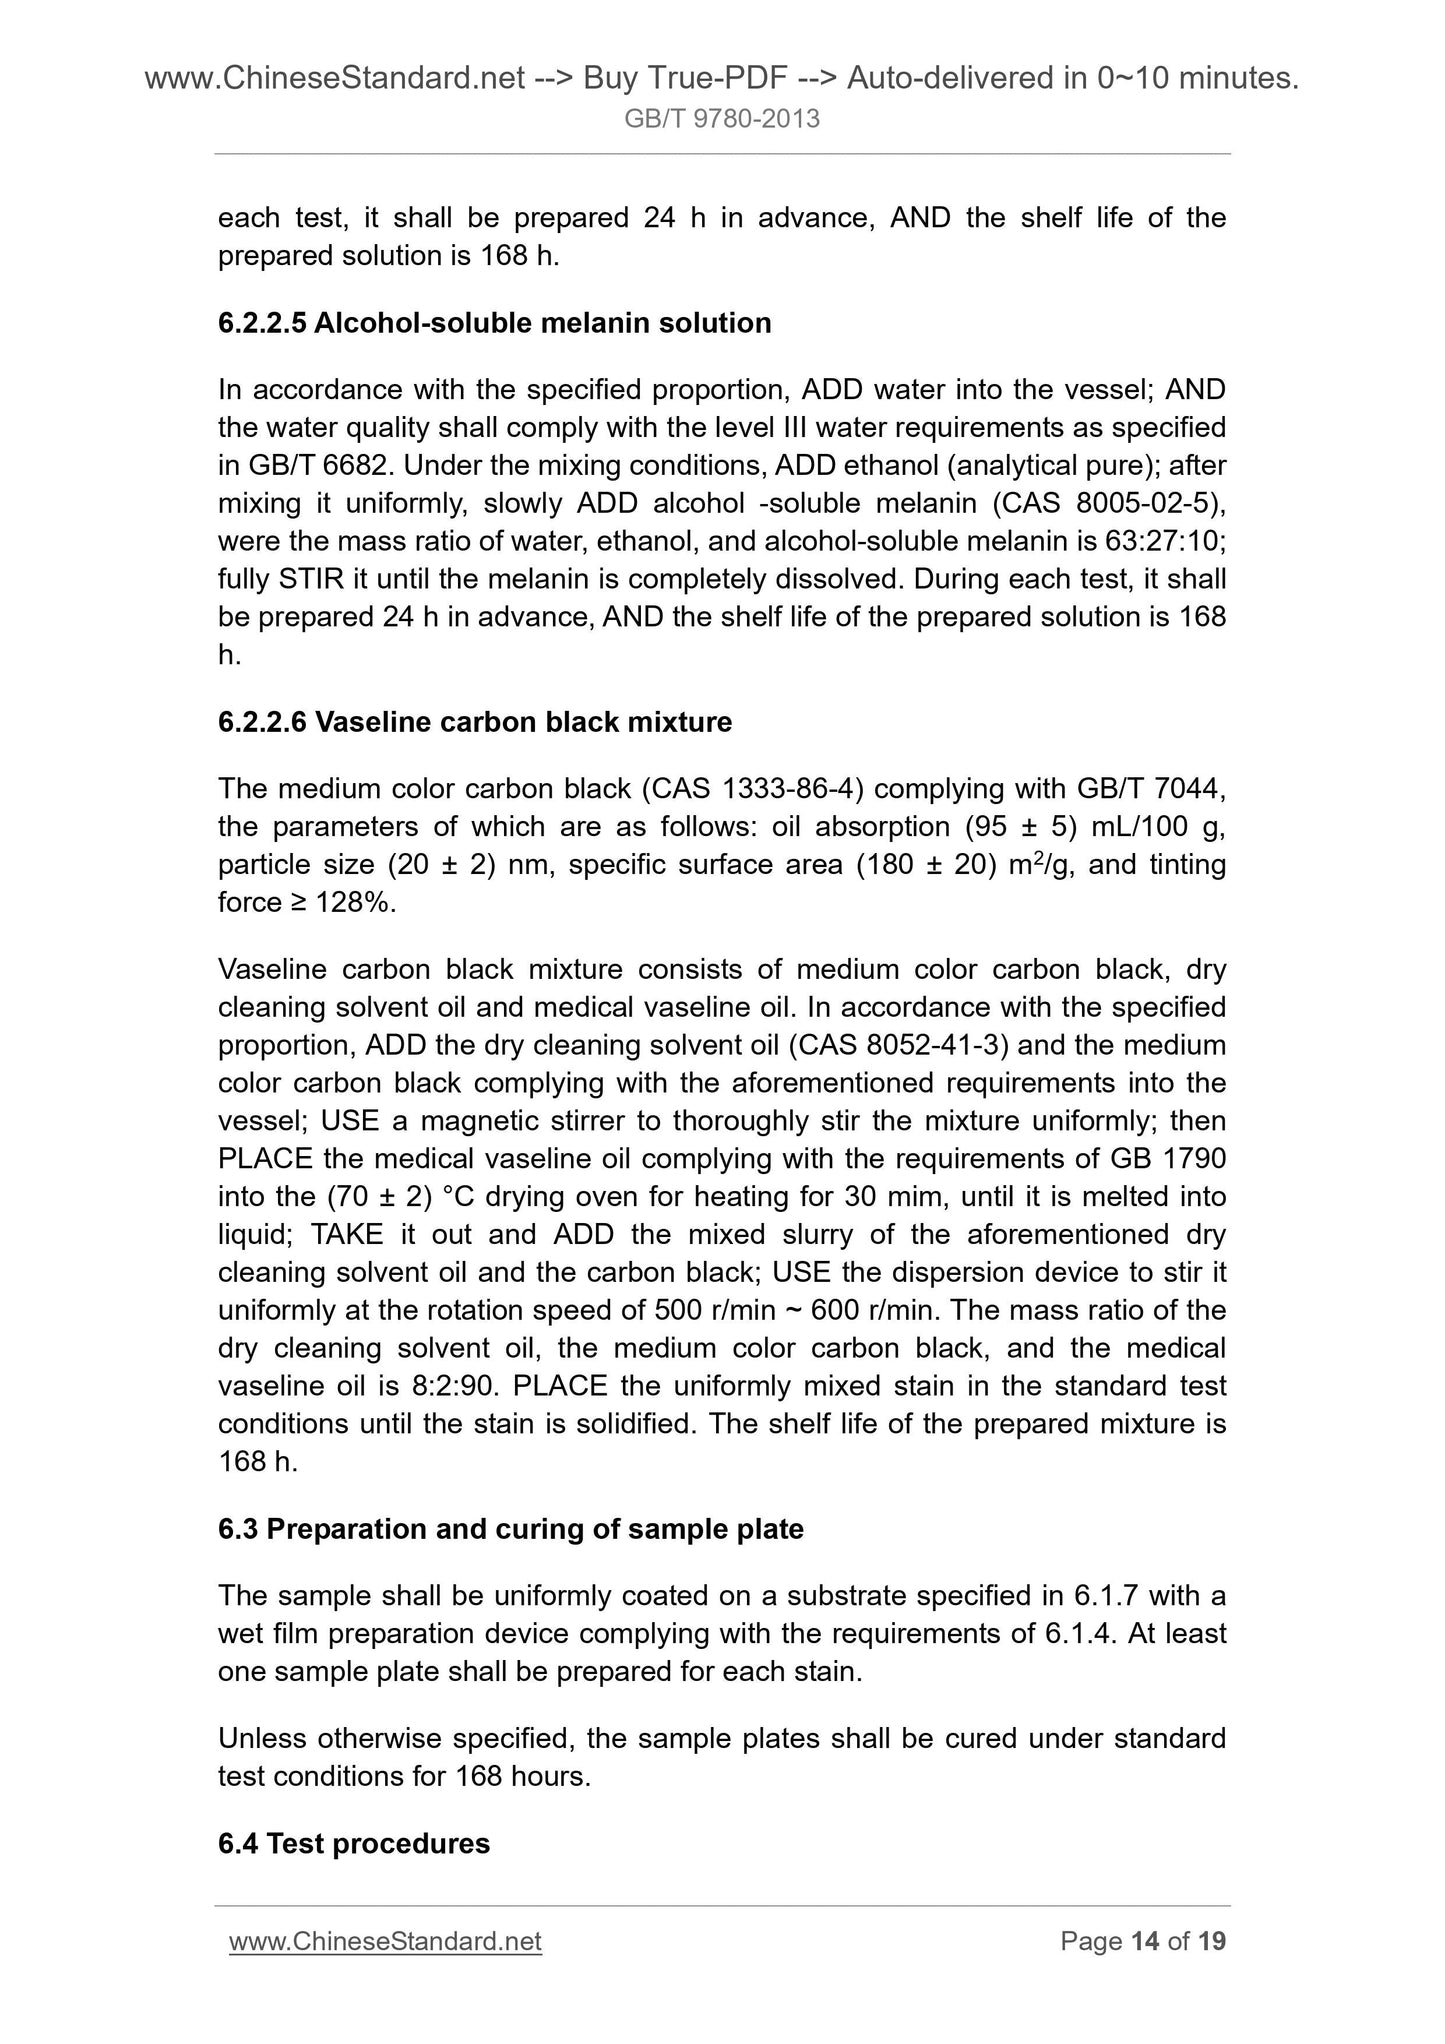 GB/T 9780-2013 Page 7